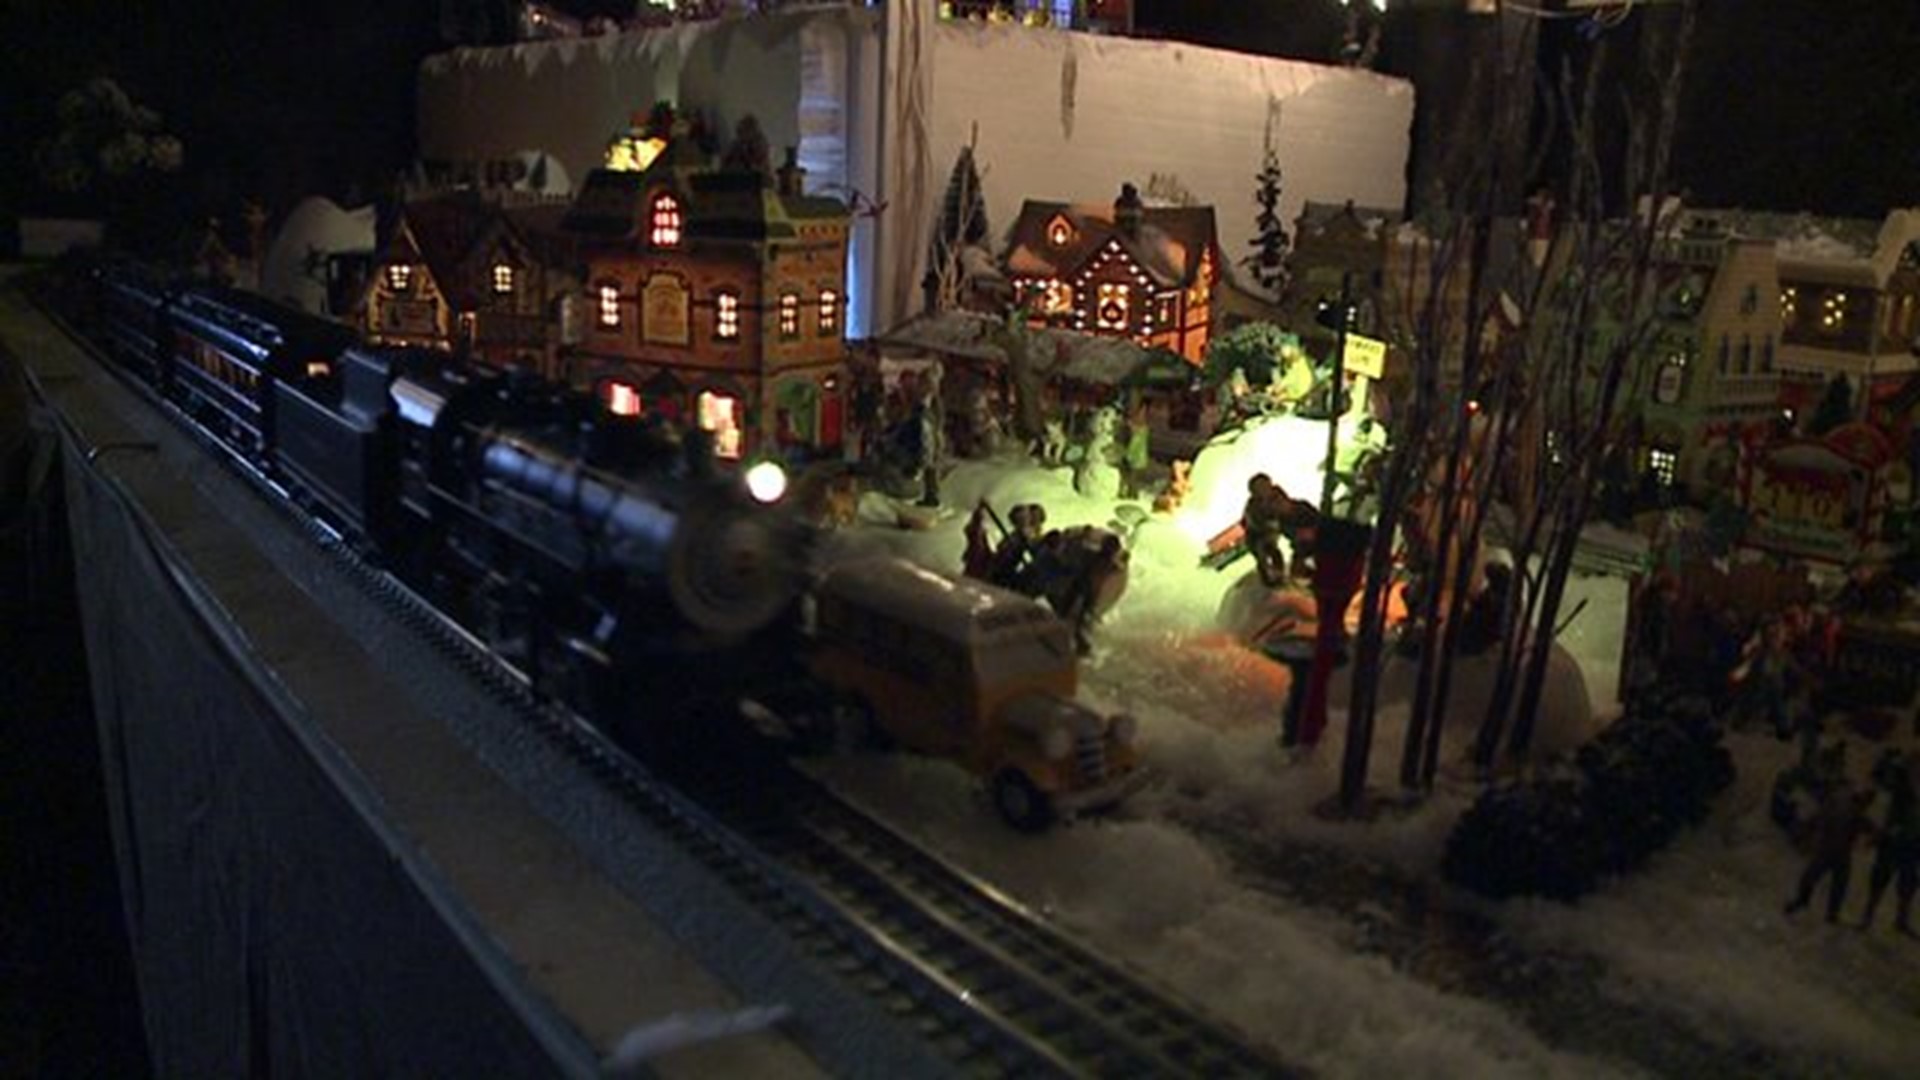 Time for Model Trains